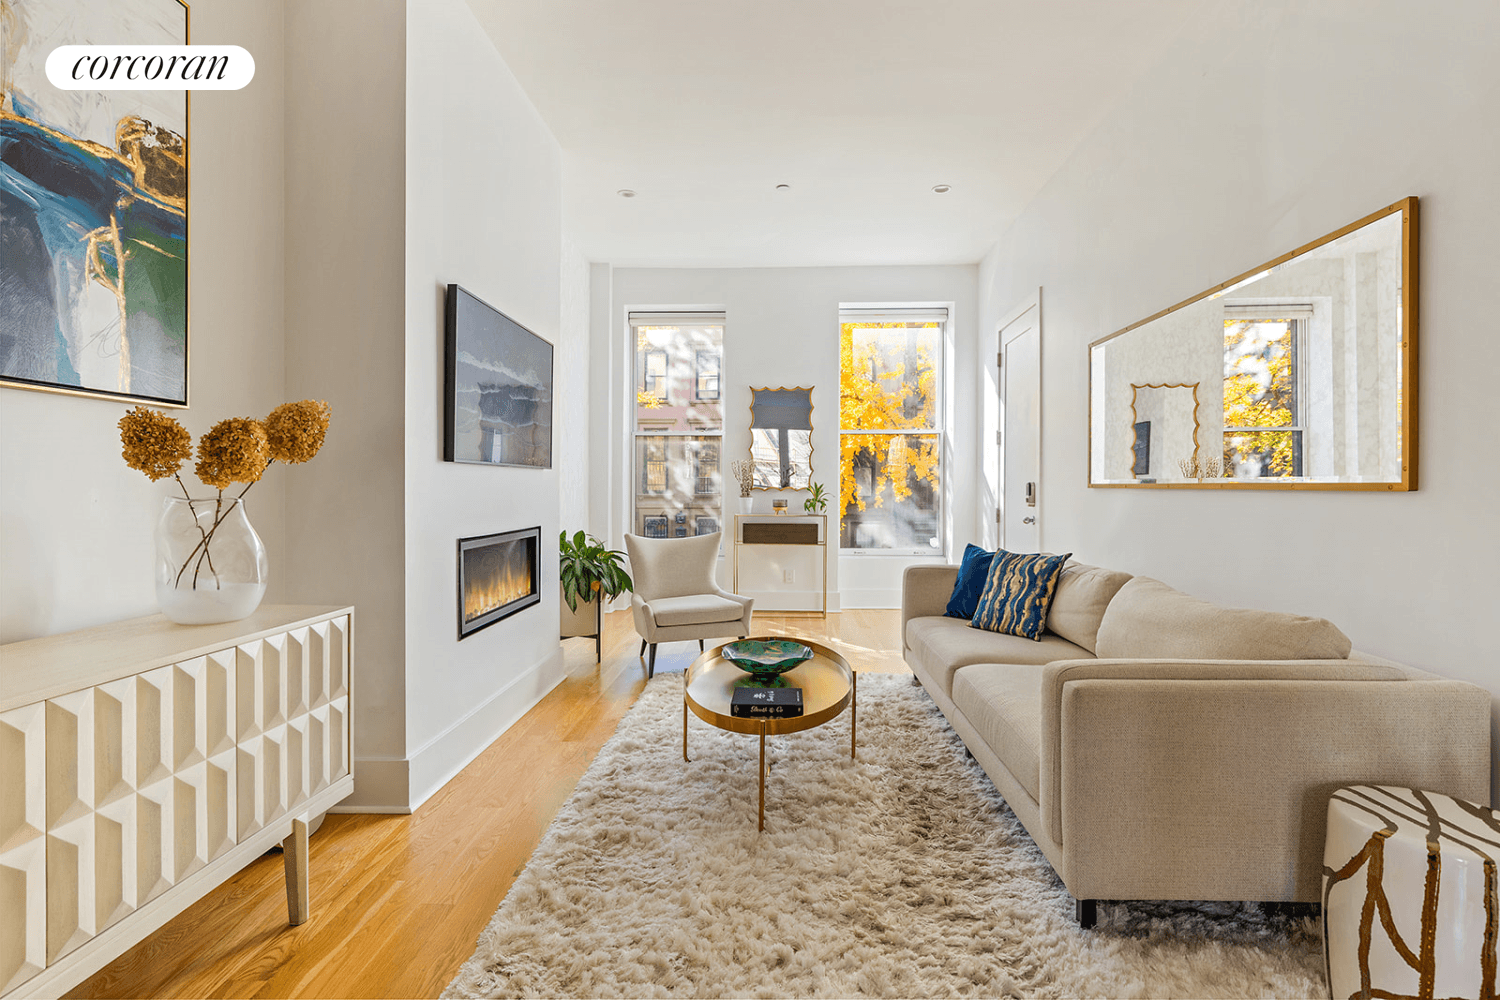 39 Park Place, Unit 1 Parlor, Garden and Cellar Triplex Occupying the entire parlor, garden, and basement levels of a 20' brownstone this home offers 2, 341 square feet of ...